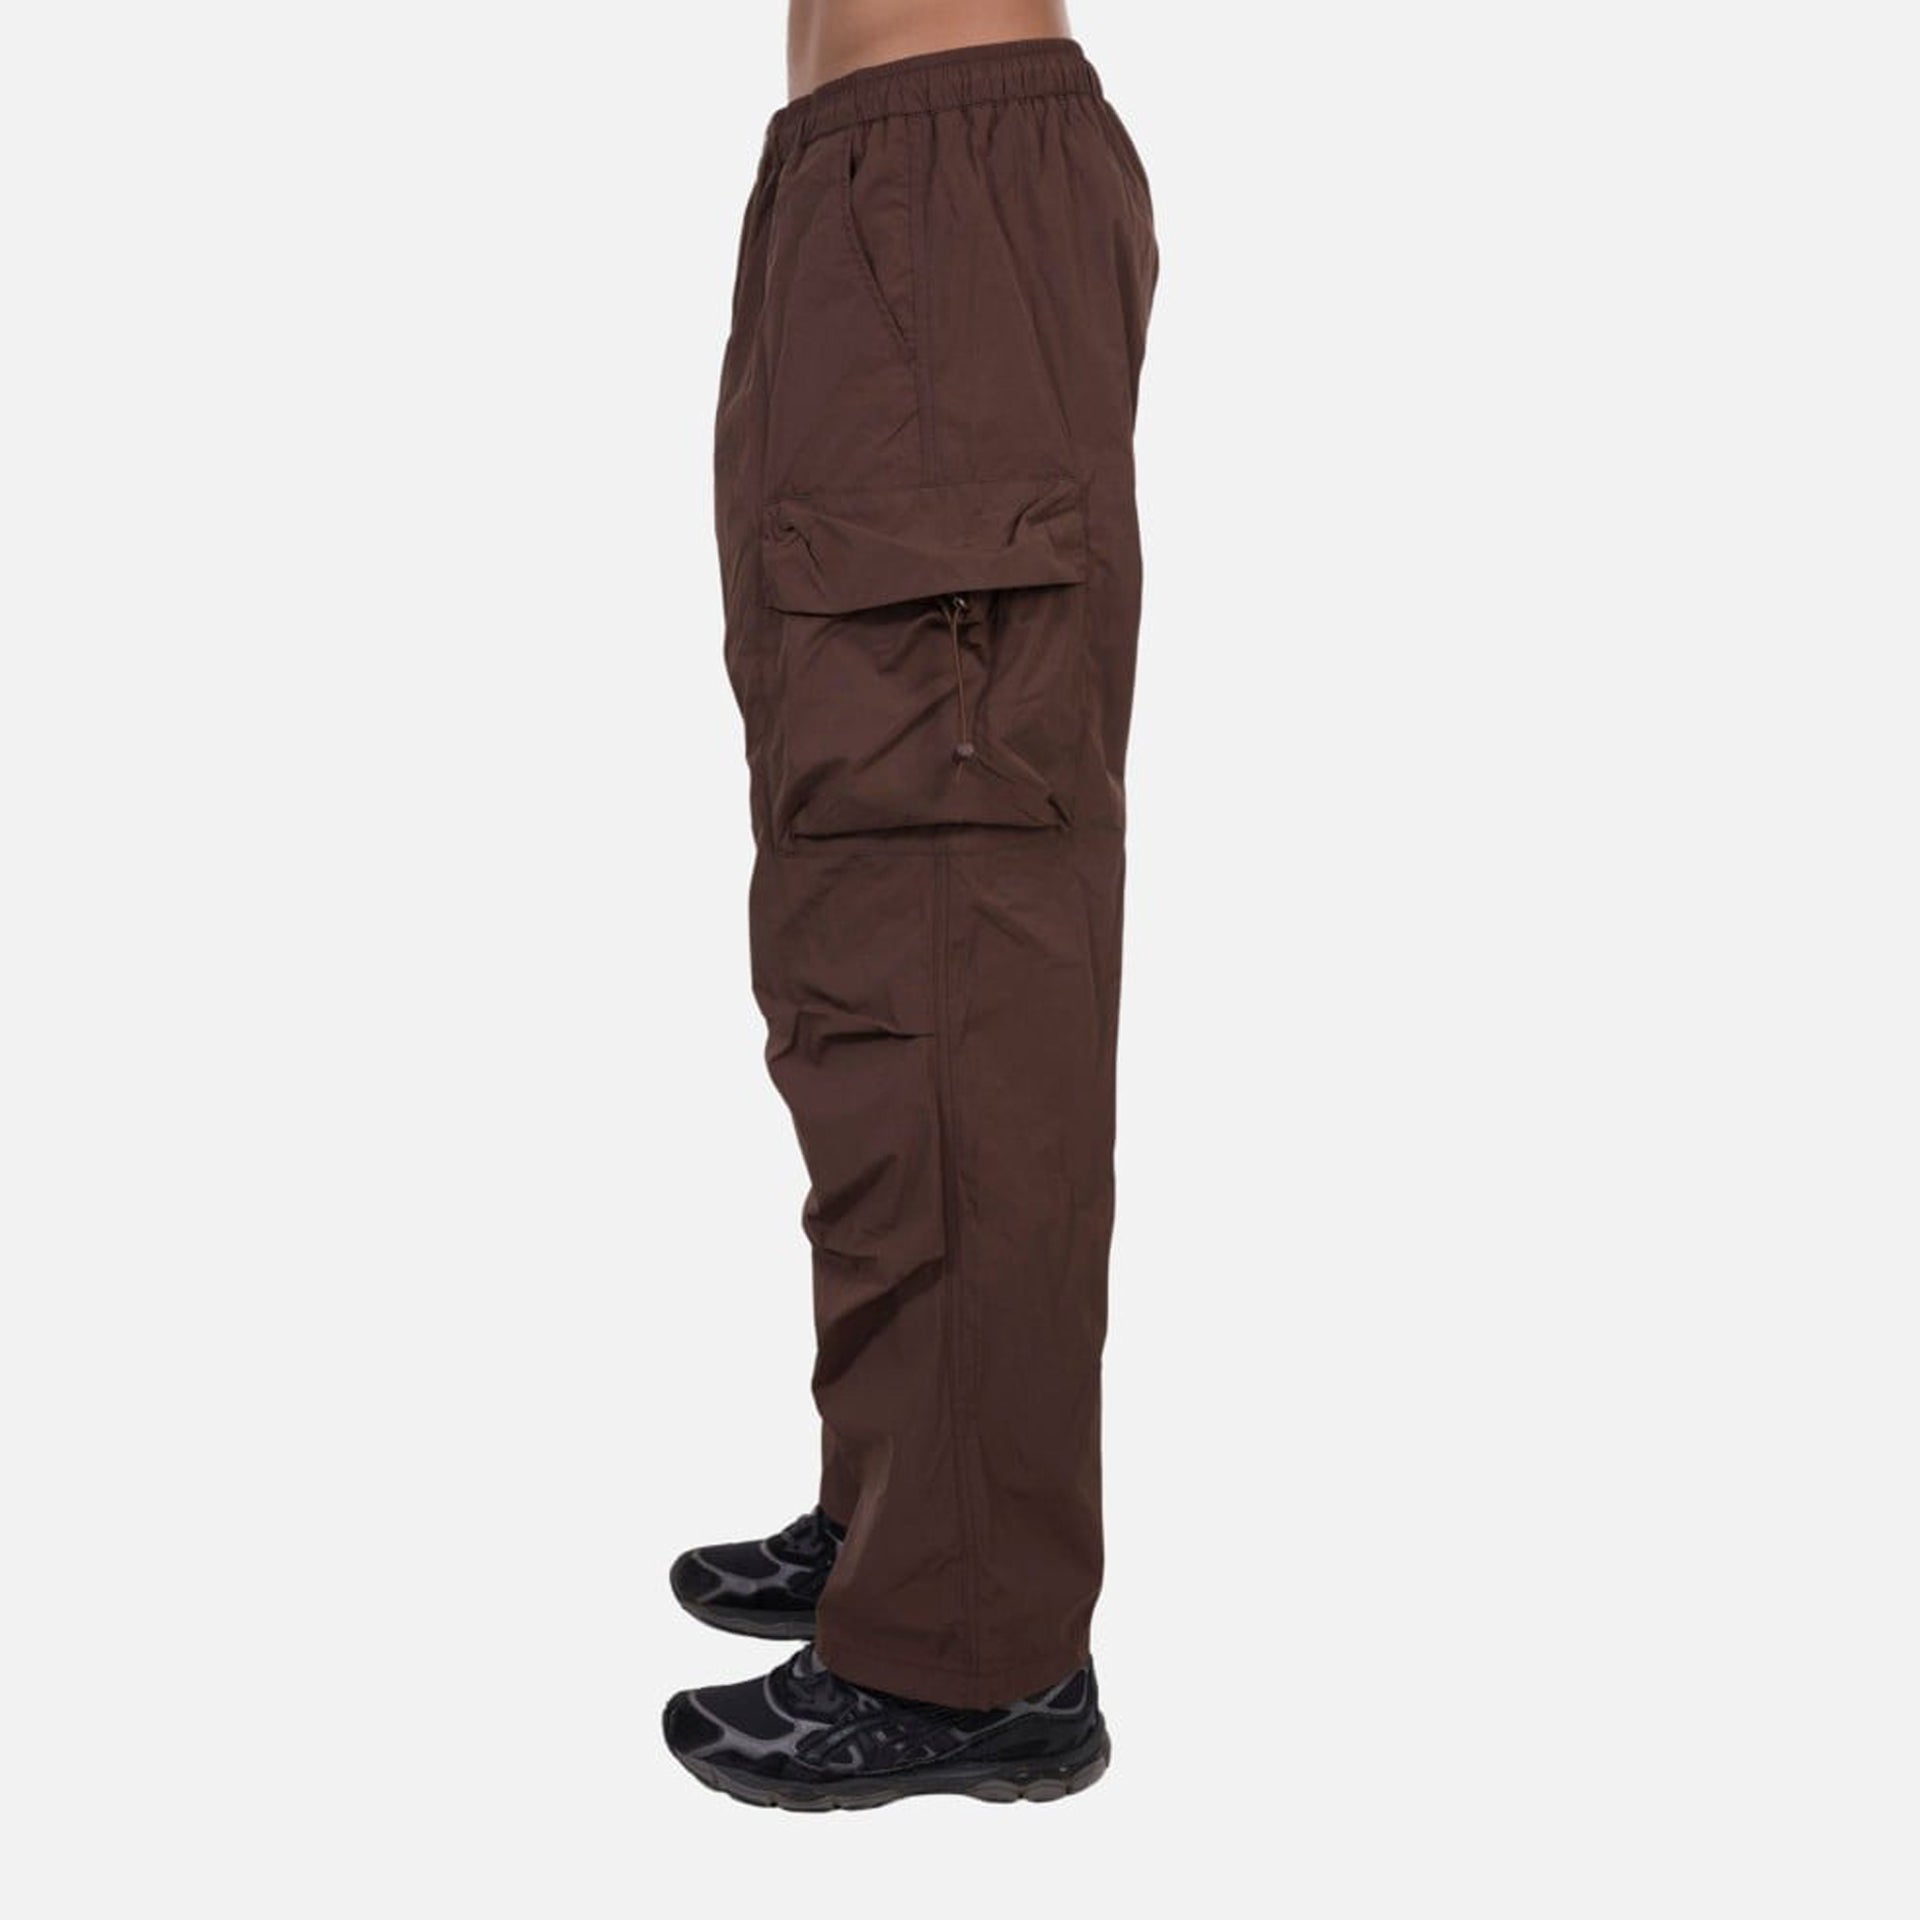 Brown Crinkled Pants With Pockets By Dracaena Cinnabari